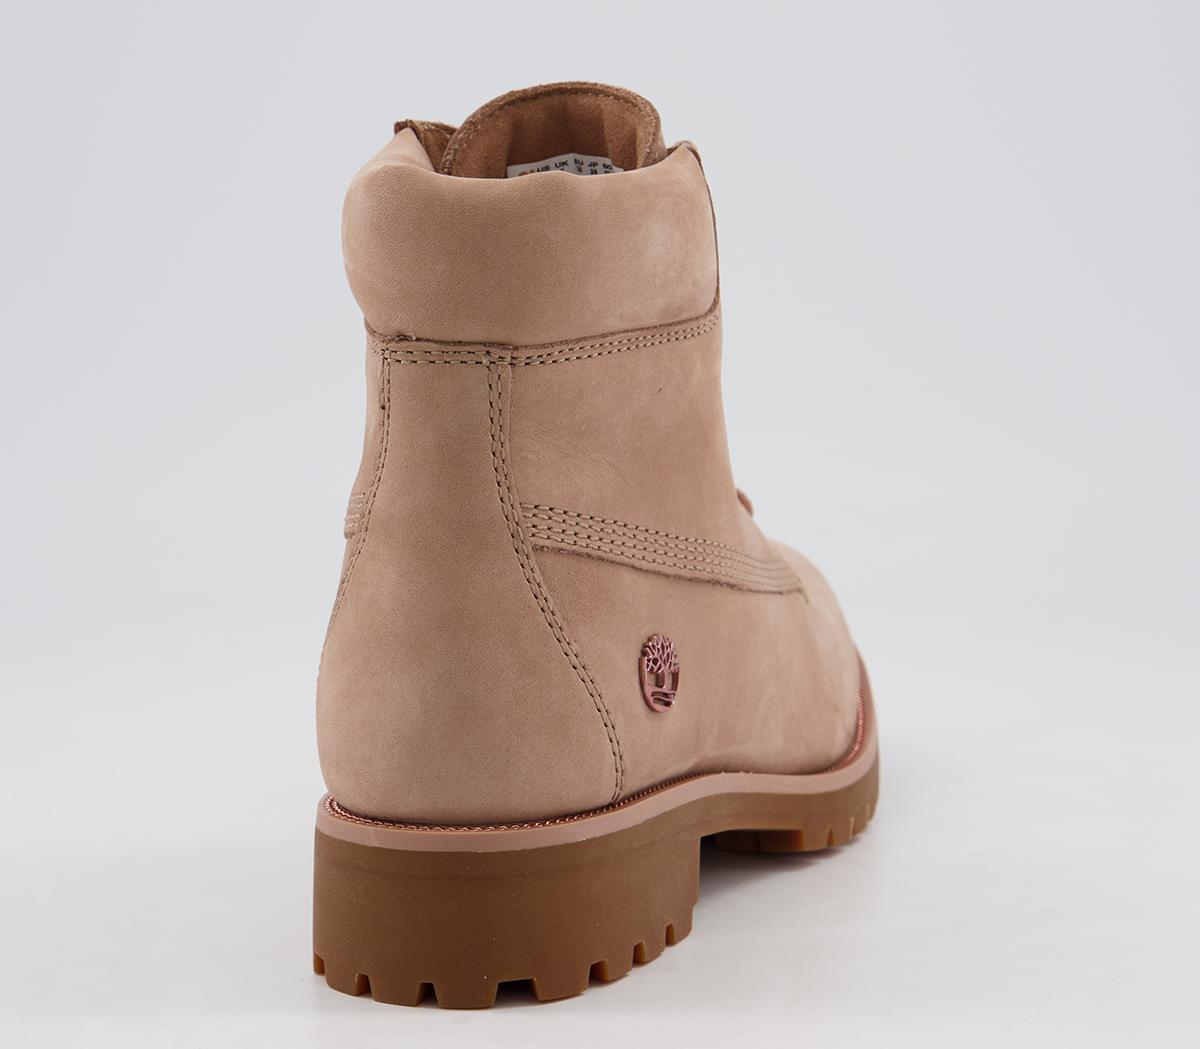 Timberland Slim Premium 6 Inch Boots Tawny Rose Gold Chain - Ankle Boots